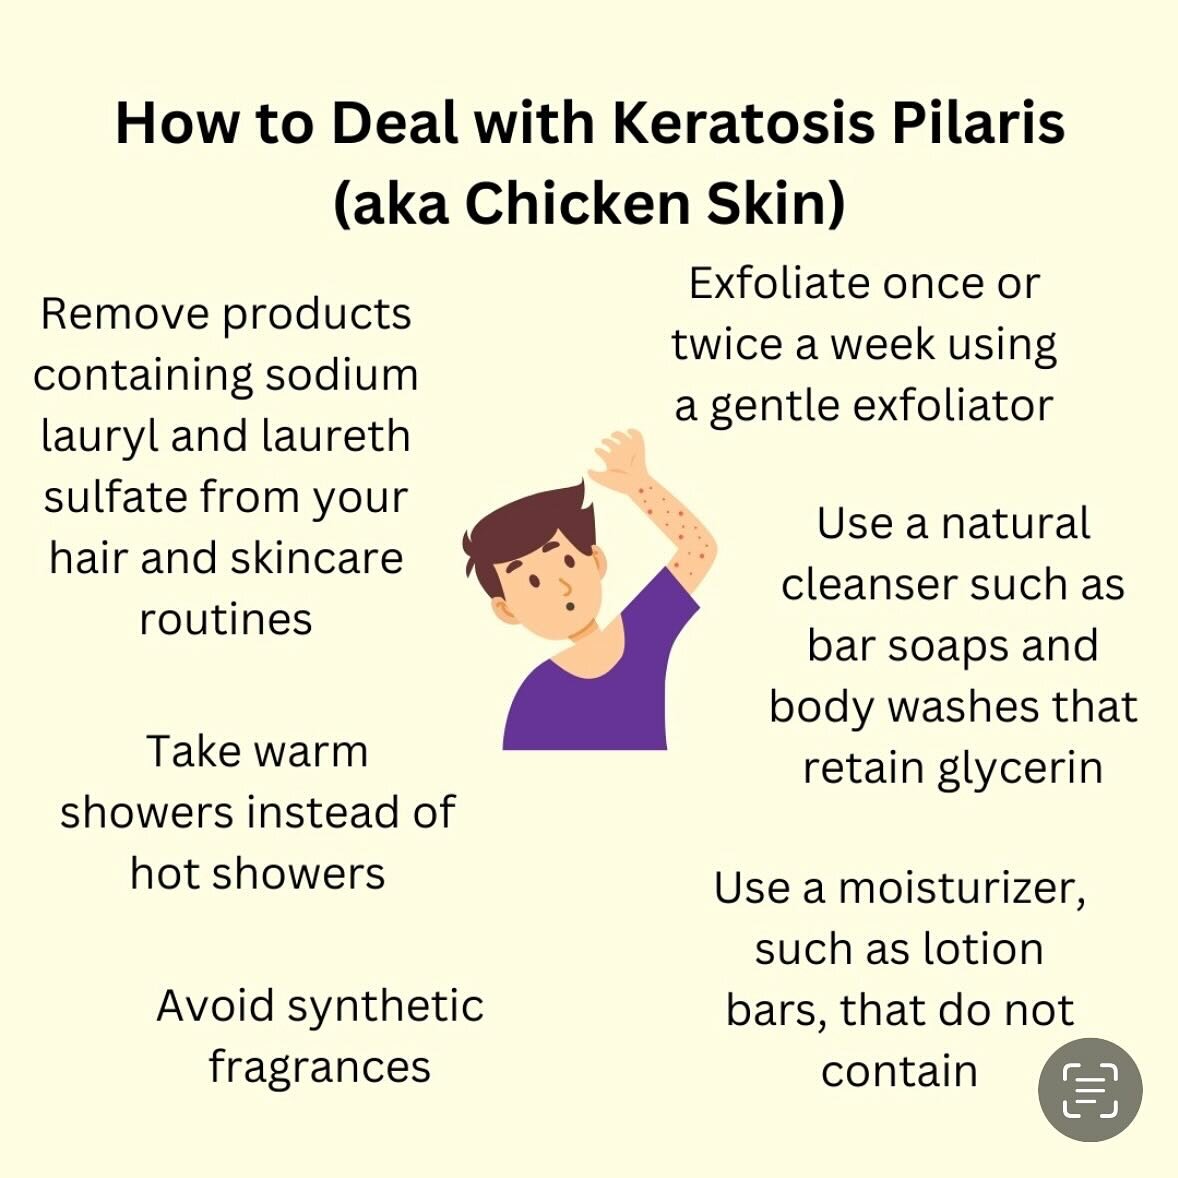 Keratosis Pilaris (KP) is a common skin condition that forms hard, dry bumps. It is also called chicken skin and usually appears on the upper arms but can occur anywhere there are hair follicles.  Head to the link in our bio and learn about KP and wa